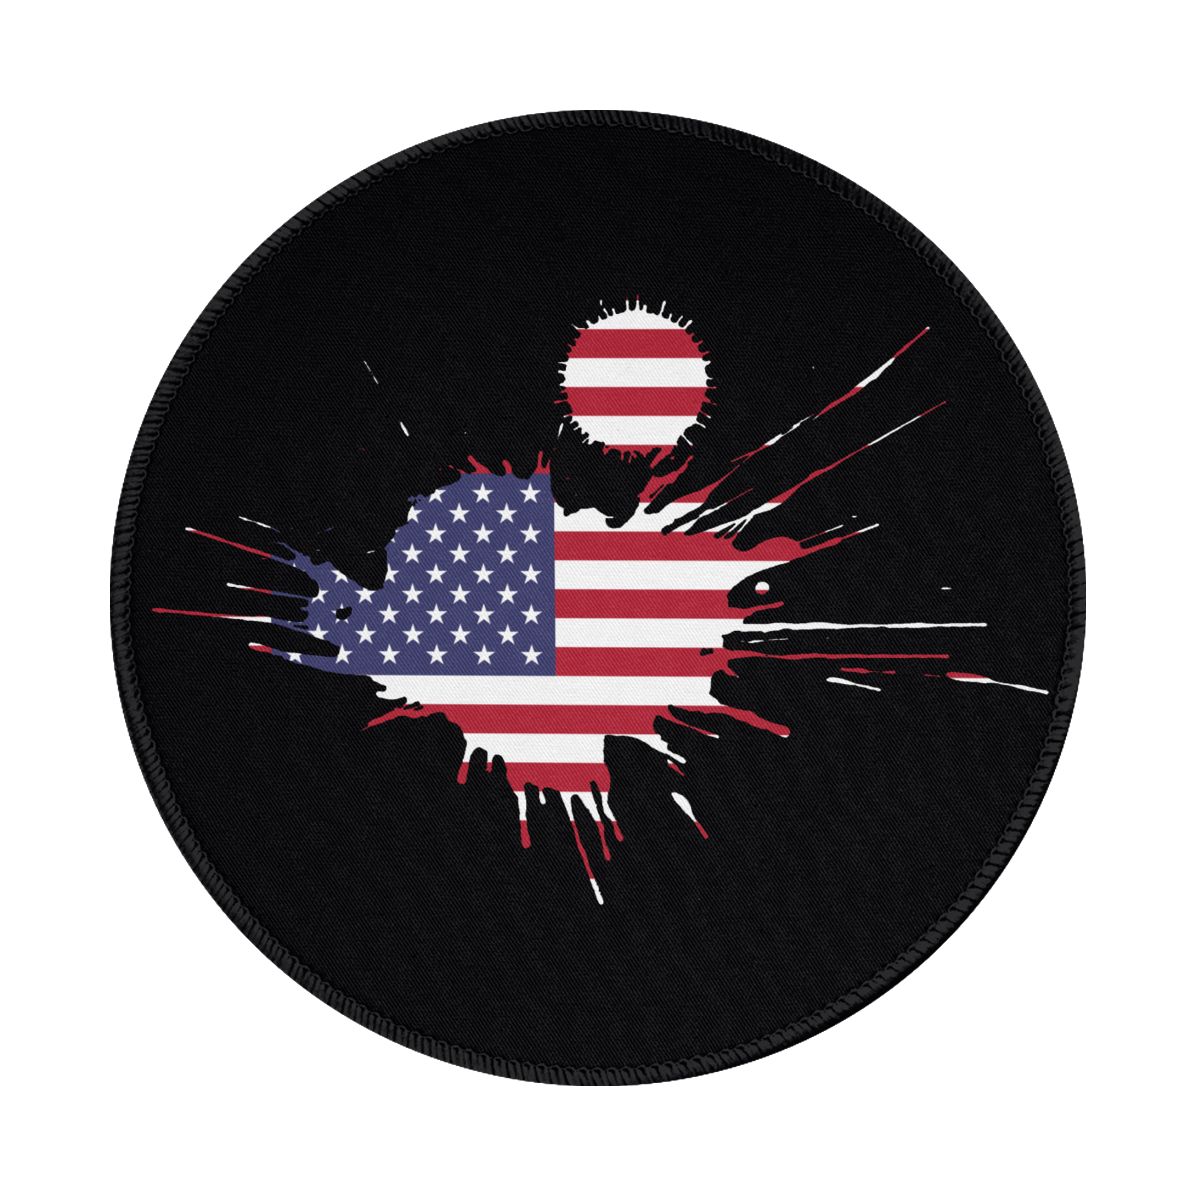 United States Ink Spatter Round Non-Slip Thick Rubber Modern Gaming Mousepad